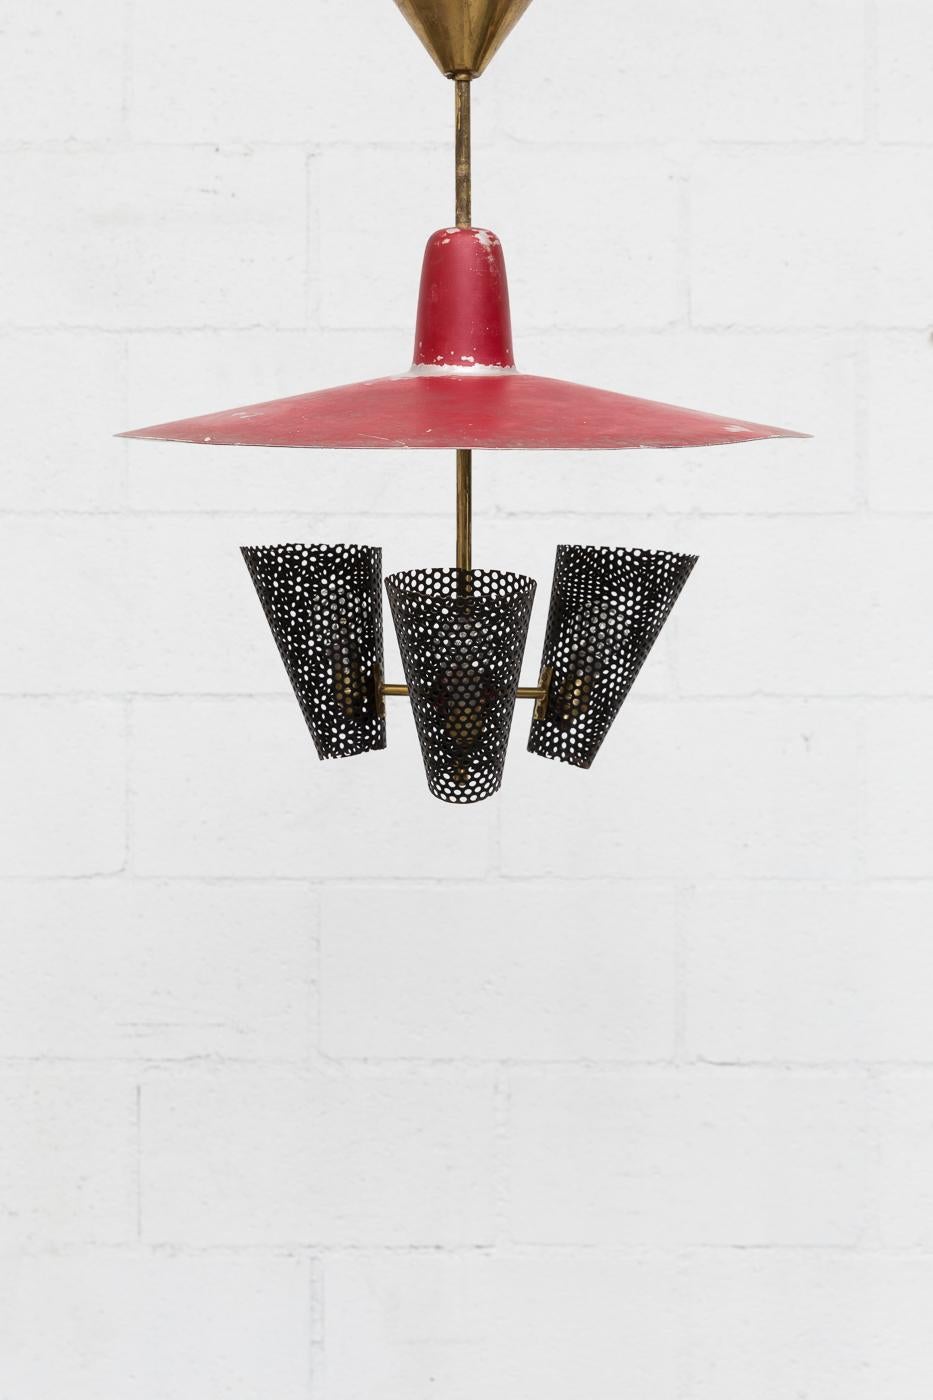 Handsome original enameled metal chandelier with three black enameled metal perforated cone shades, a red enameled metal top shade and brass hardware. In very original condition with heavy patina, showing visible wear and use.